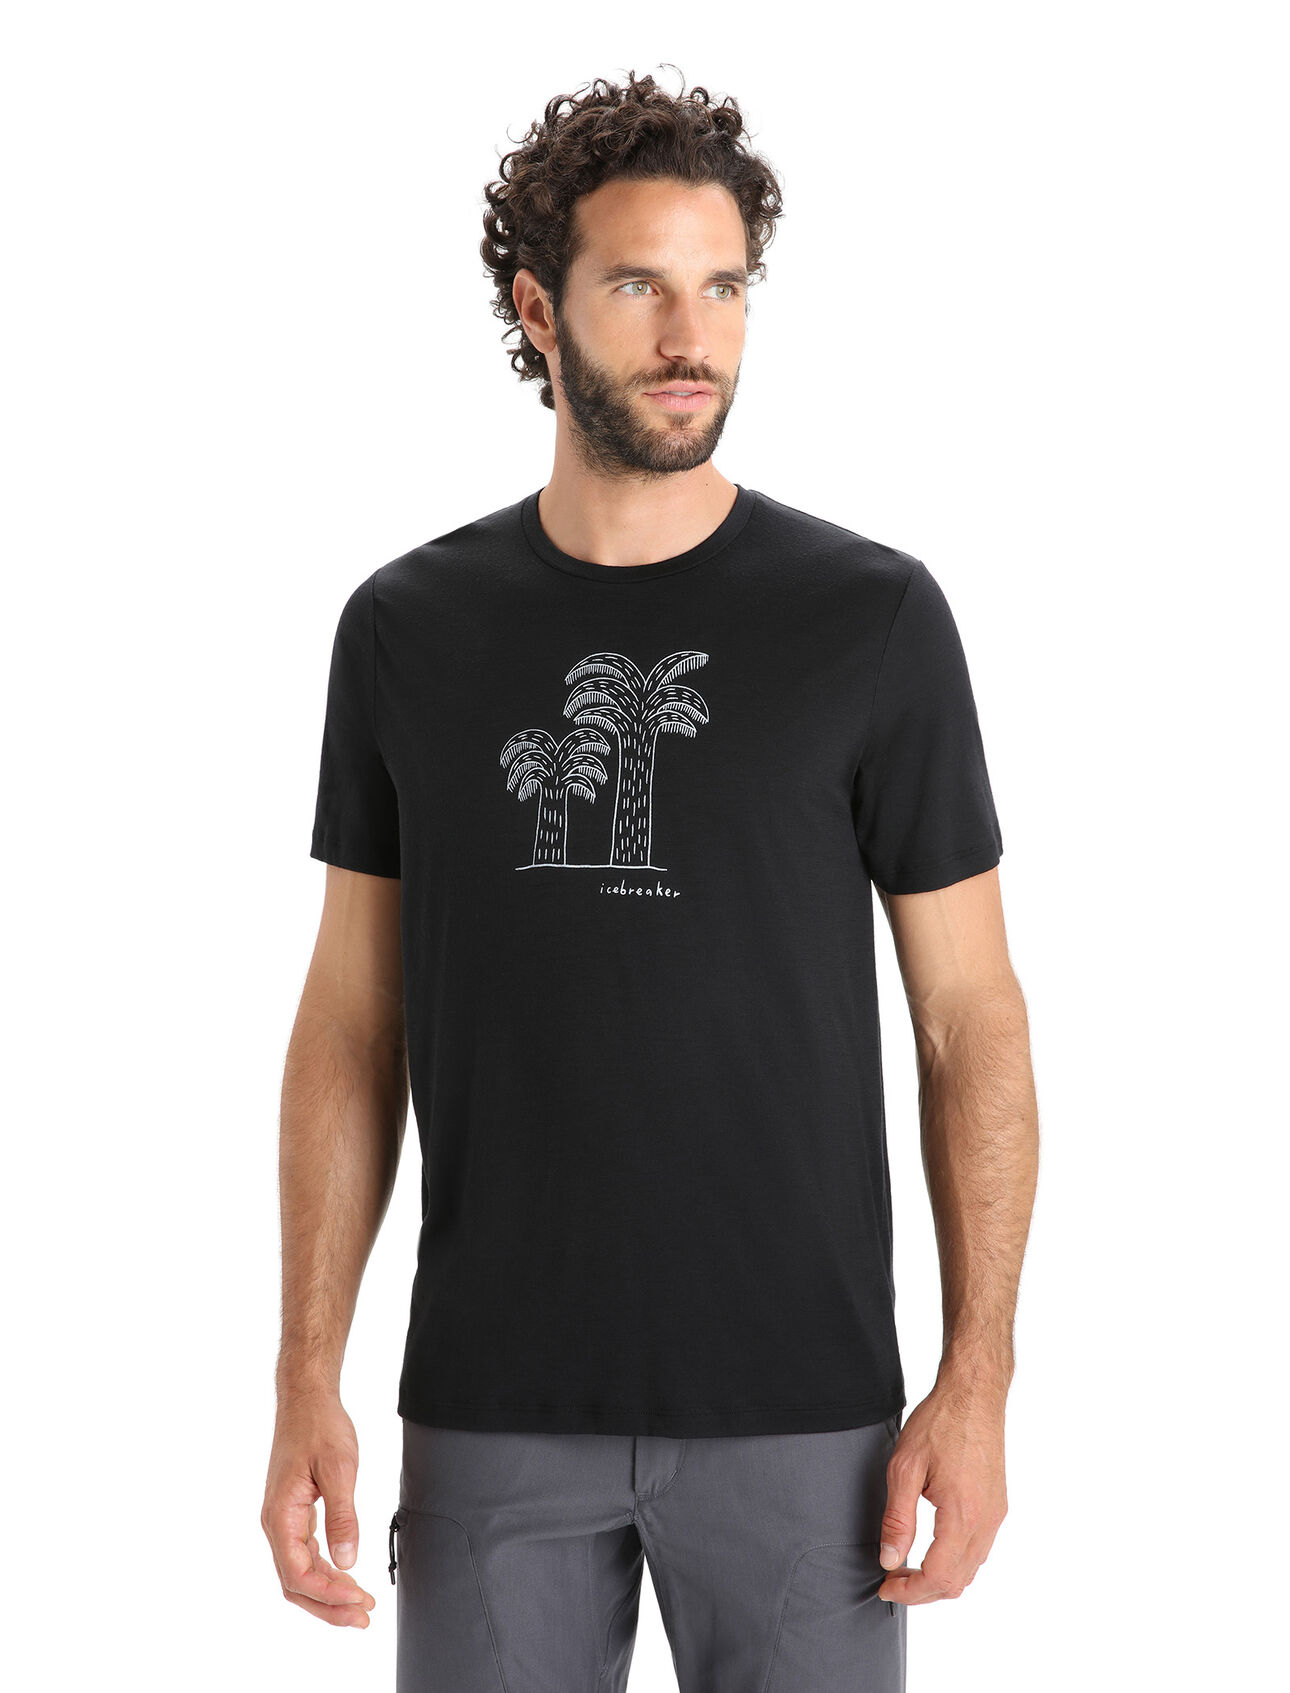 Mens Merino Tech Lite II Short Sleeve T-Shirt Giant Ferns Our versatile tech tee that provides comfort, breathability and natural odour-resistance for any adventure you can think of, the Tech Lite II Short Sleeve Tee Giant Ferns features 100% merino for all-natural performance. The original artwork by Mark Conlan features a fun illustration of the New Zealand tree fern, an endemic species that can grow to six meters tall.